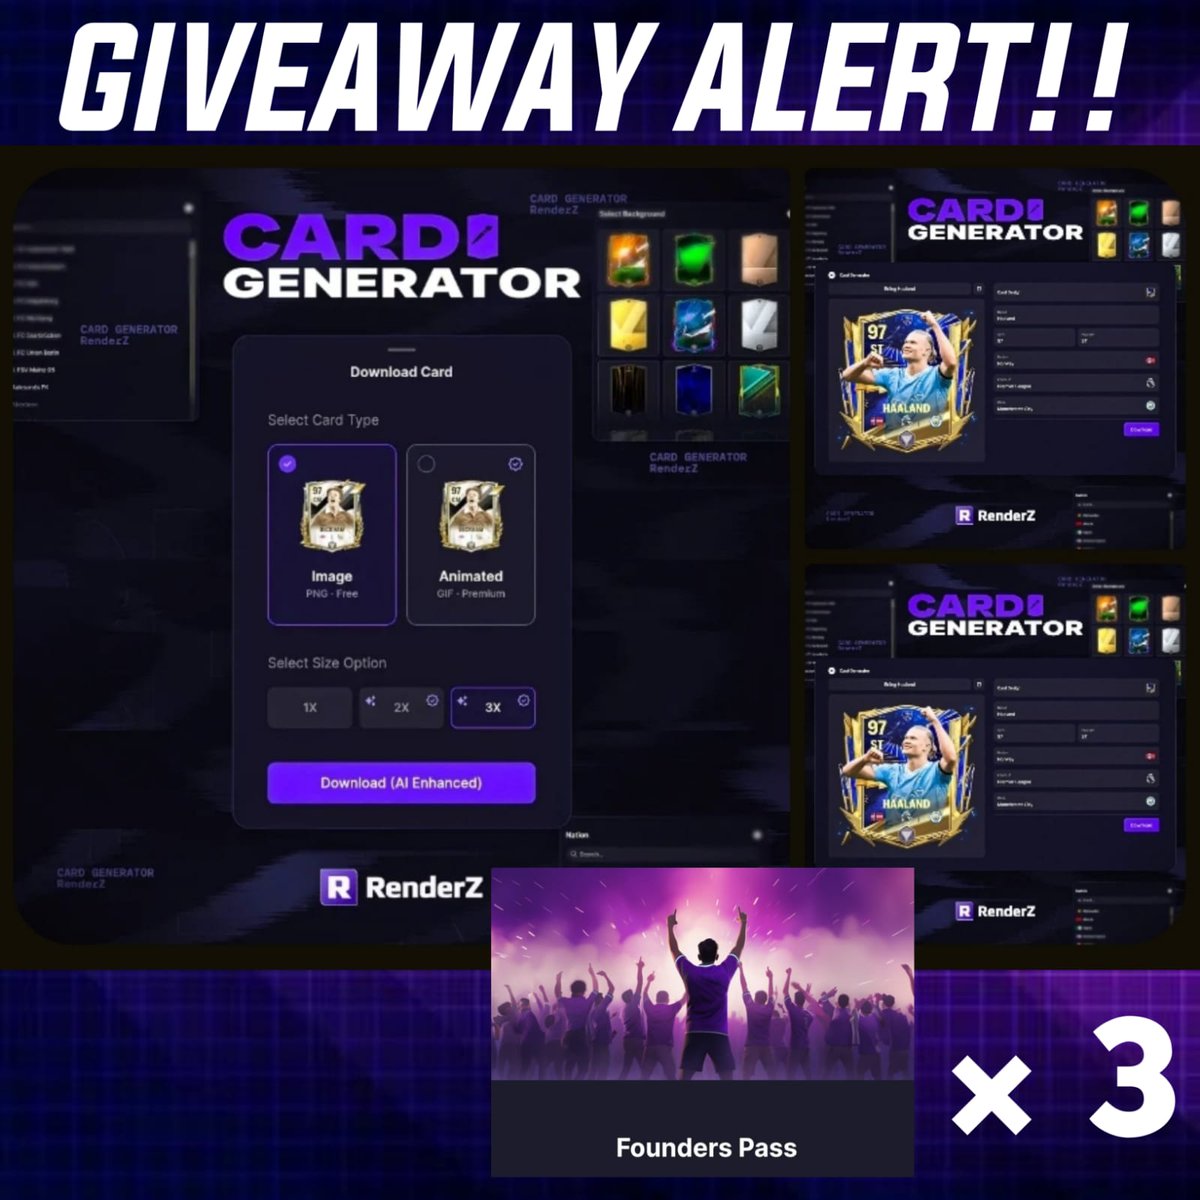 3x RenderZ '1 Year' Premium Founders Pass Giveaway Follow @RaiHarshit2 & @fifarenderz Retweet 🔁 Drop your own customised Card in Comments renderz.app/24/card-genera… 3 Random Unique Cards will be selected as Winners on 10th April, Good luck everyone